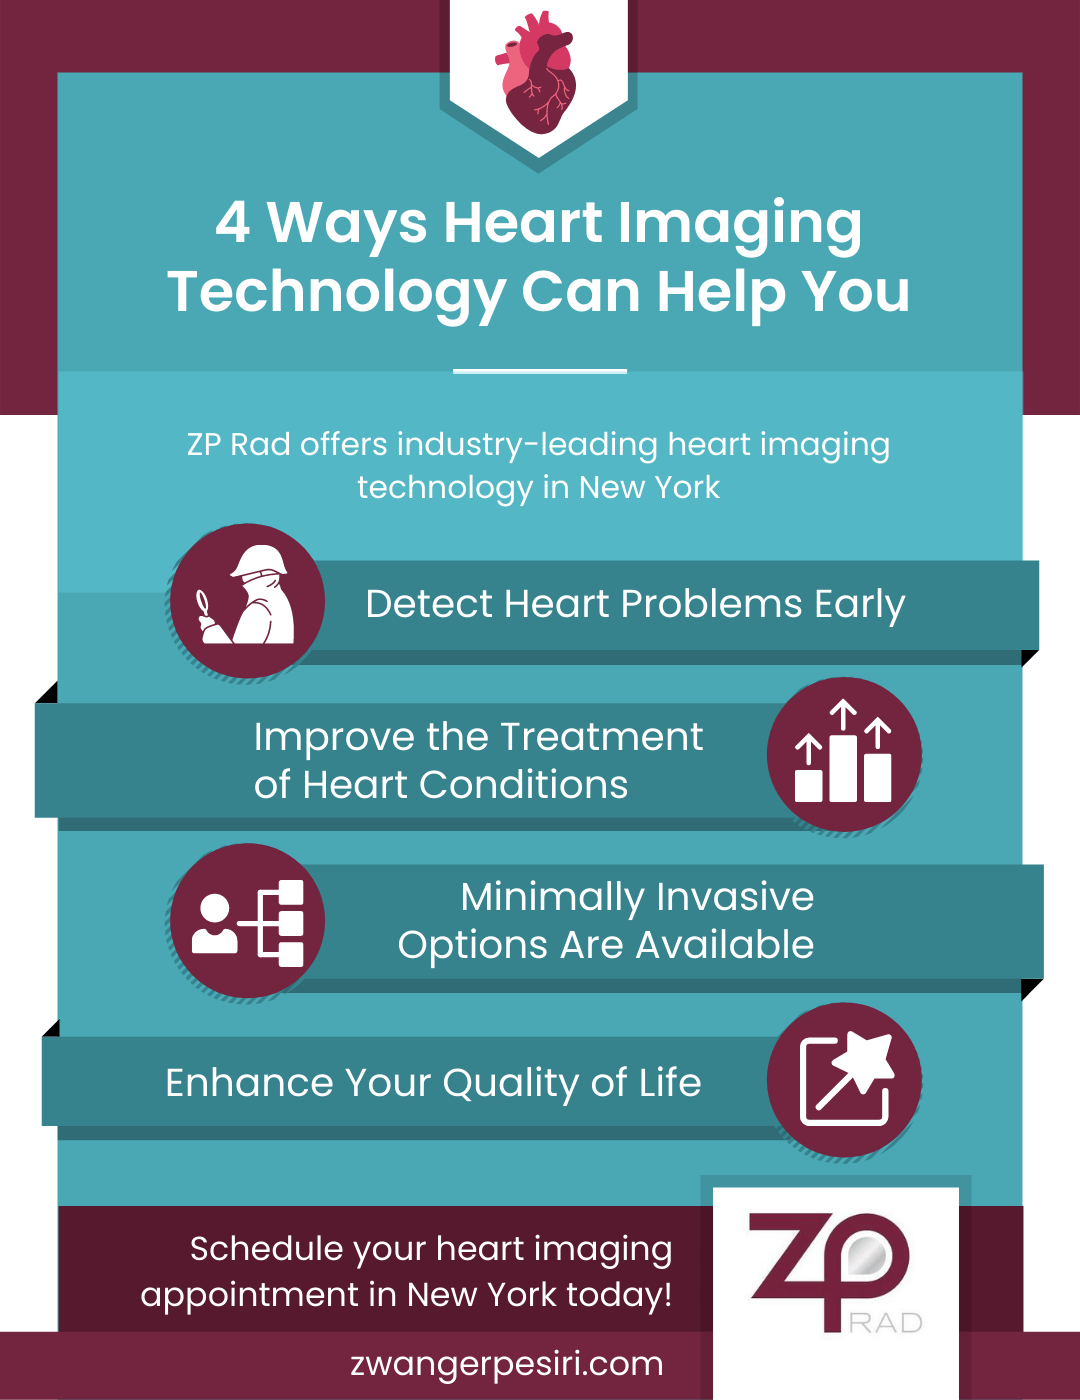 4 Ways heart imaging technology can help you infographic